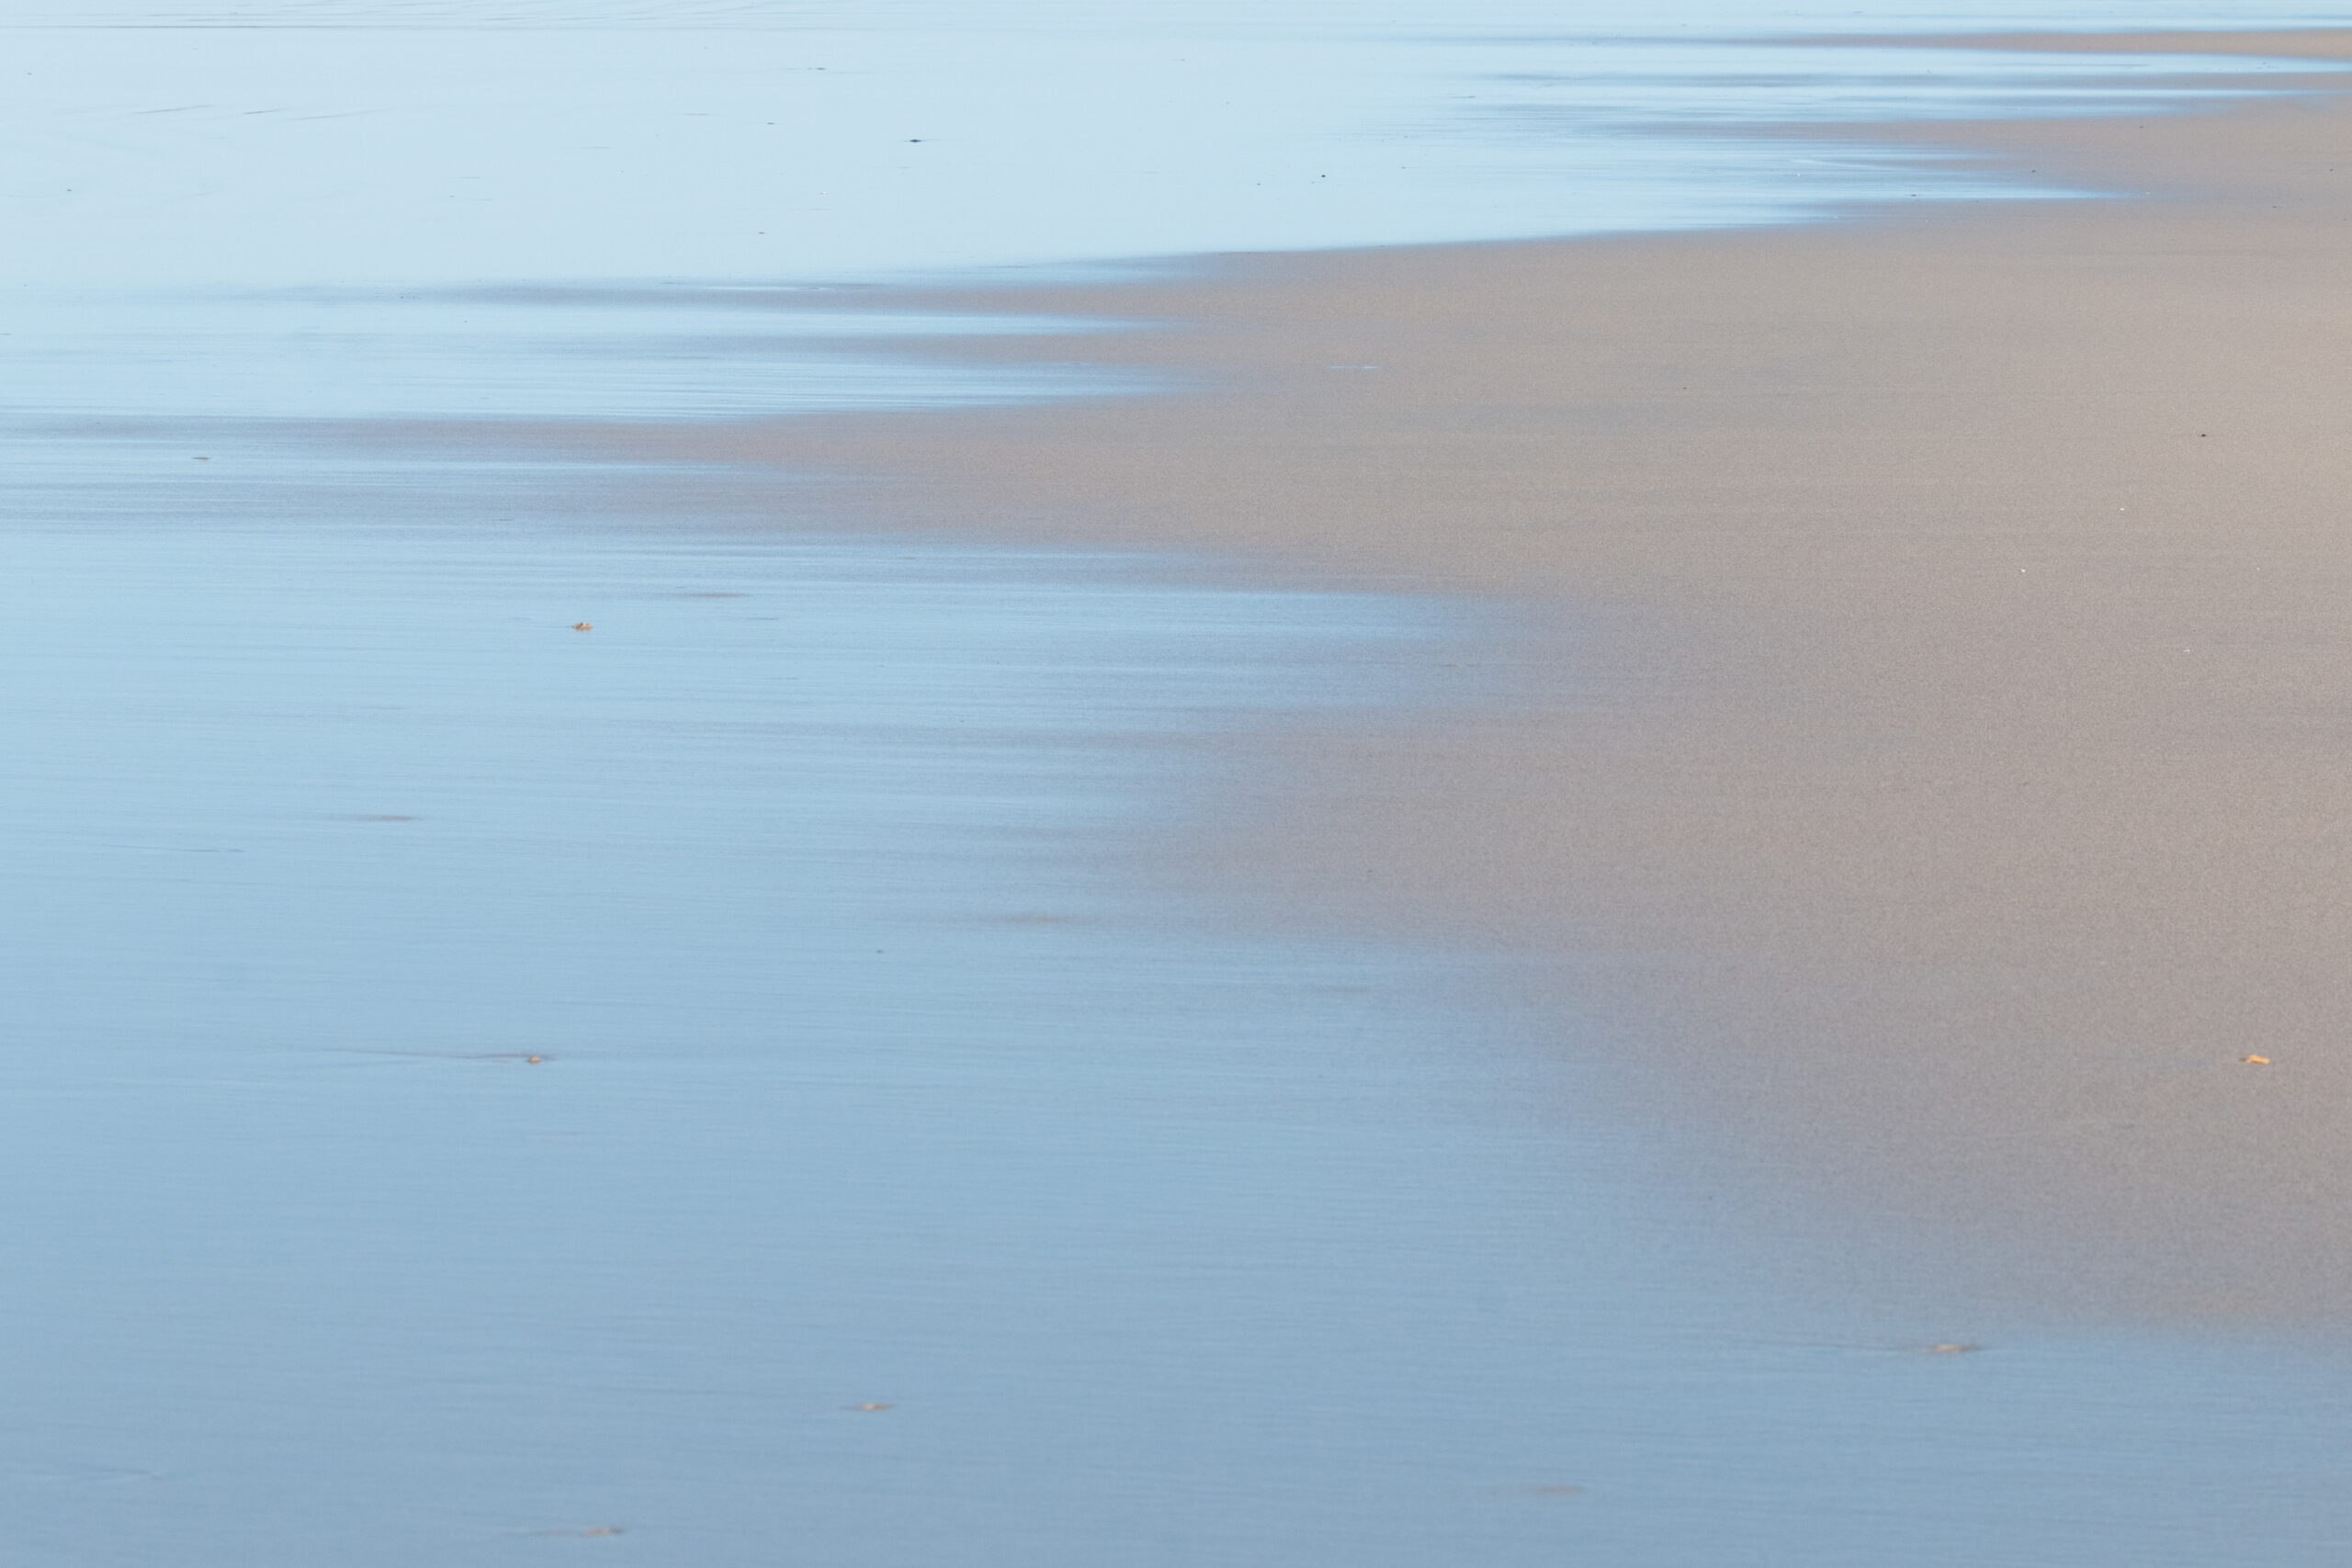 Beach and Ocean photography, showcasing a mindful photographic experience, by Leonardo Ureña. This tranquil image features silvery blue water lapping onto sand.